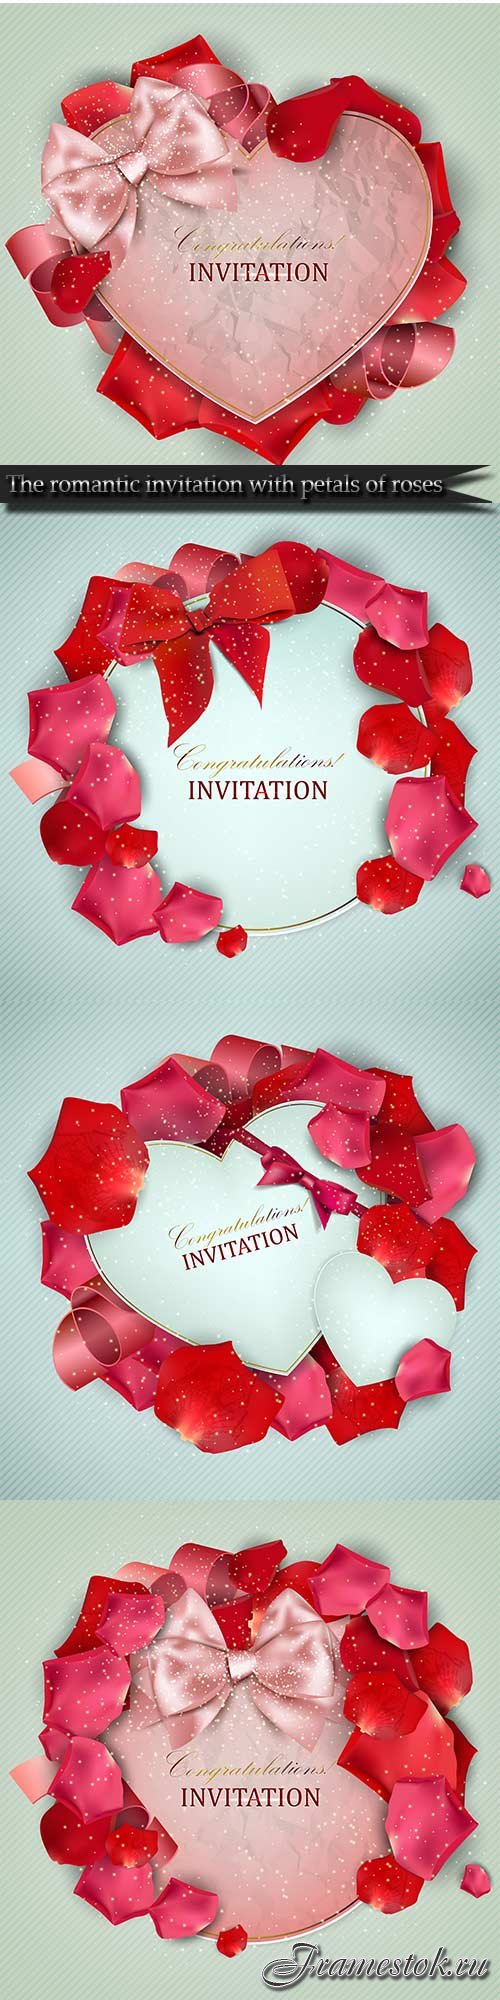 The romantic invitation with petals of roses